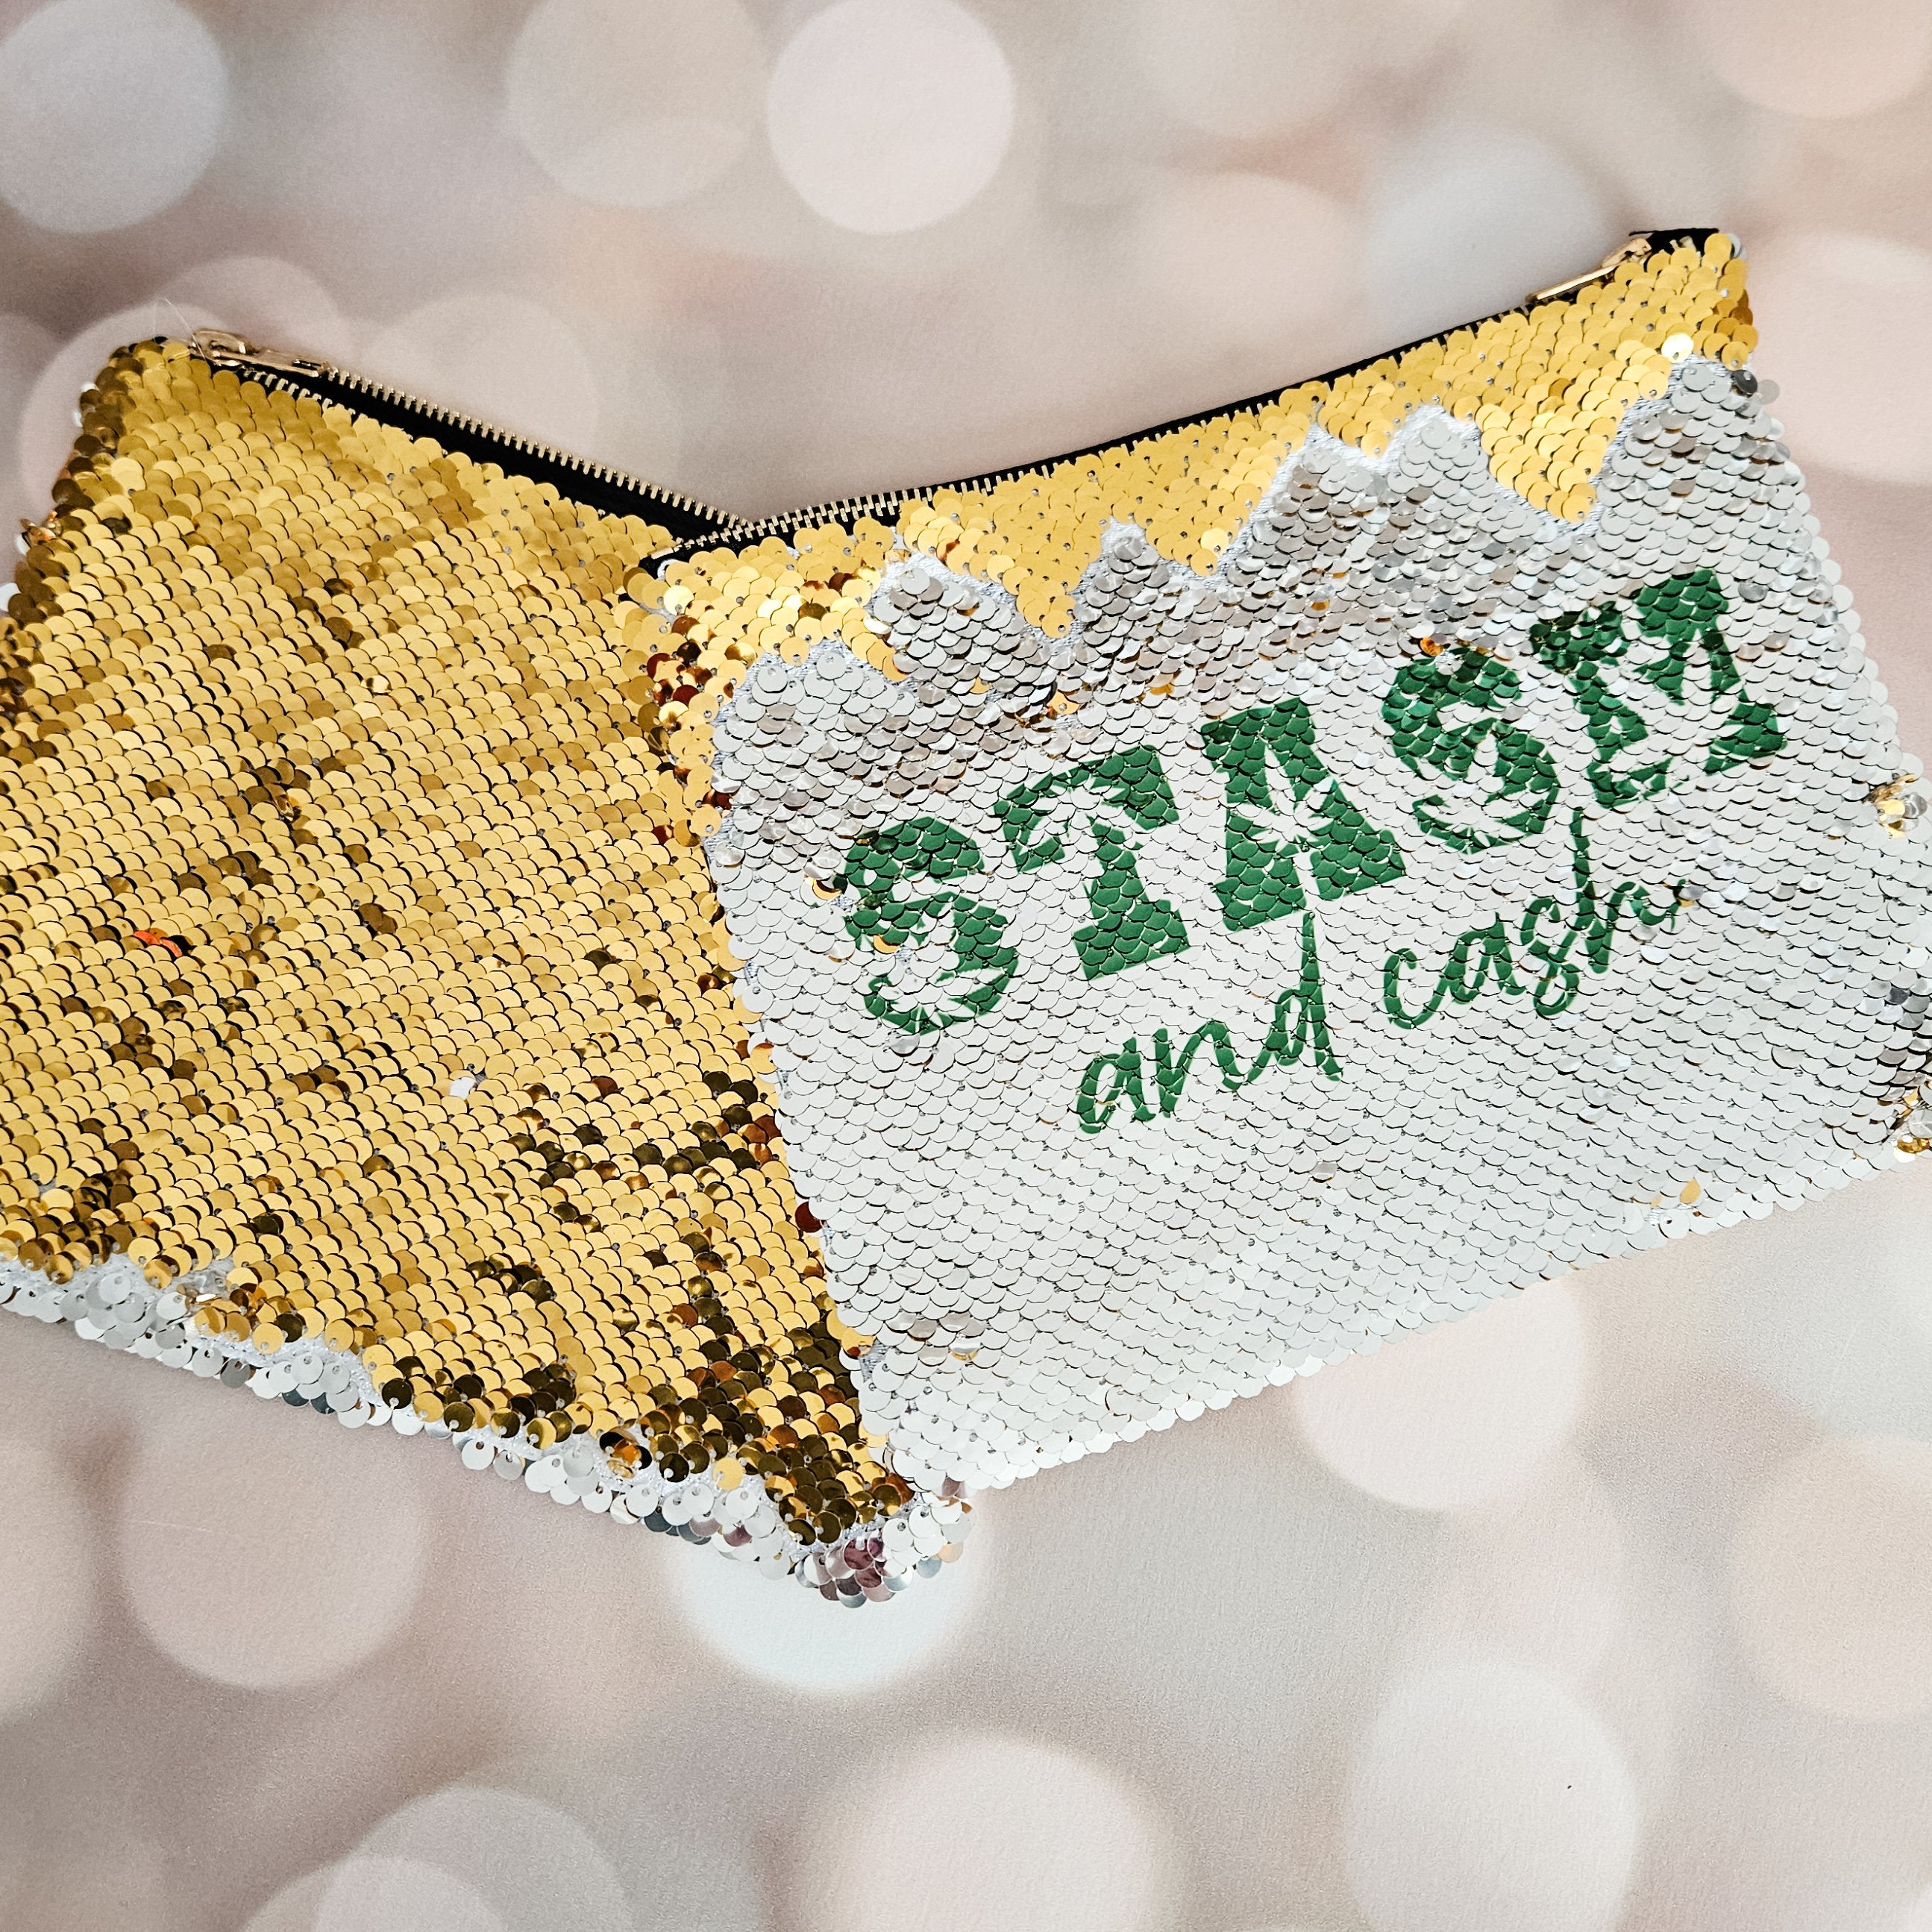 Stash and Cash 420 Sequin Cosmetic Case - Funny Weed Storage Pouch for Single Women Salt and Sparkle